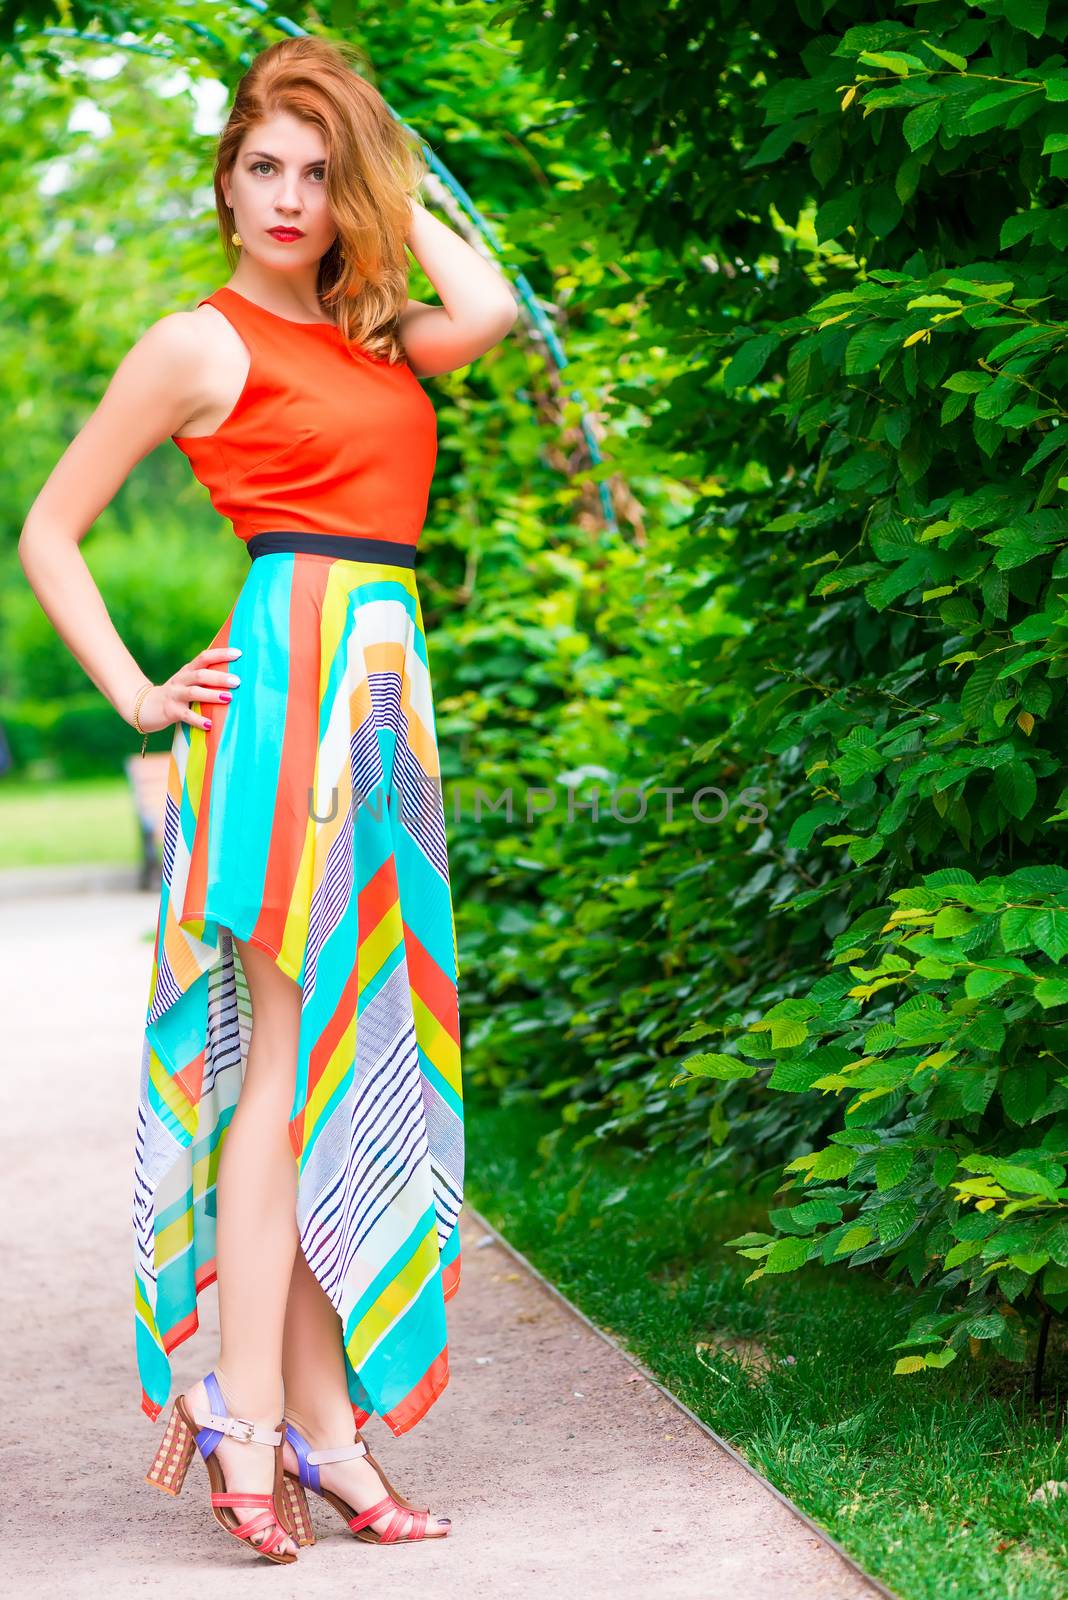 Fashionable slim woman in a bright dress outdoors